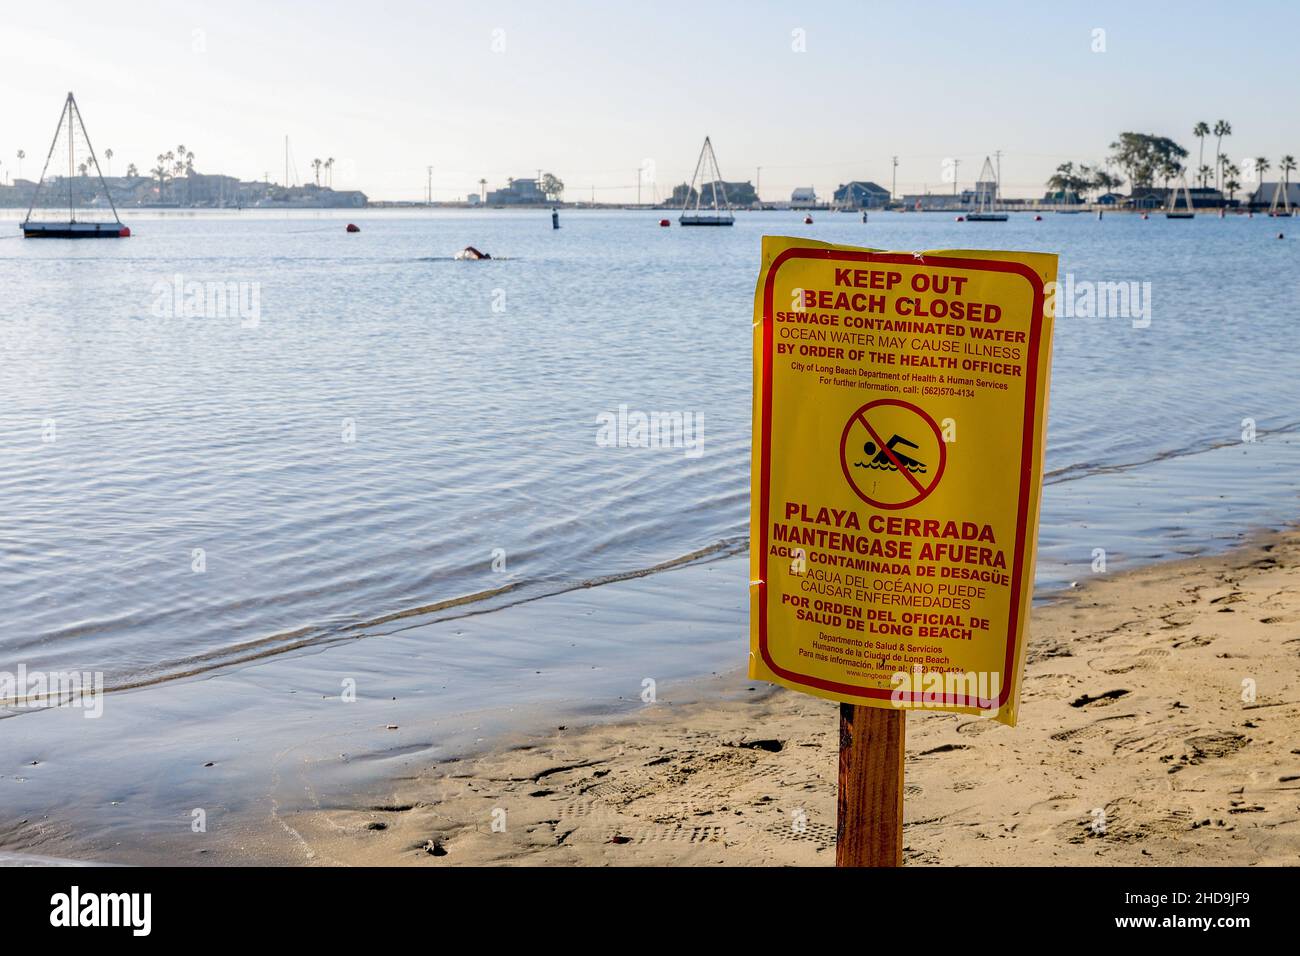 Long Beach, California, USA. 4th Jan, 2022. January 4th, 2022, Long Beach, California, USA: The City of Long Beach posted only a few signs in response to massive sewage spill. The spill was reported on December 30th when a 48-inch sewer mainline failed during the recent winter storm, leaking sewage into the waterway that empties into Los Angeles Harbor.Despite posted signs, some swimmers were still entering the water. (Credit Image: © Ron Lyon/ZUMA Press Wire) Stock Photo